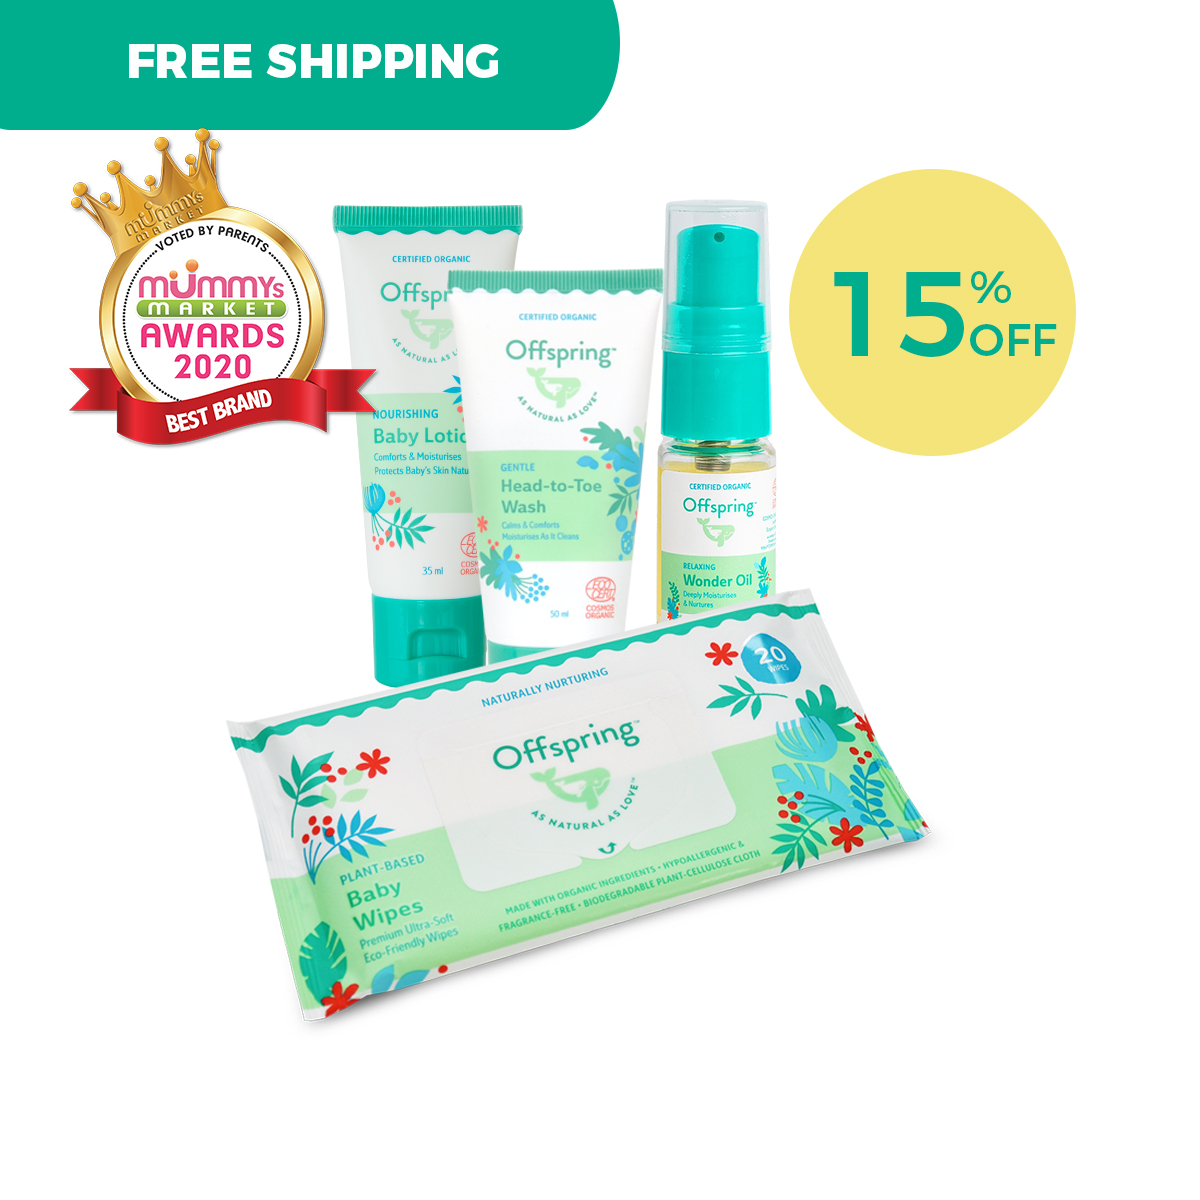 Offspring Handy Bundle - Nourishing Baby Lotion 35ml + Gentle Head To Toe Wash 50ml + Plant-Based Baby Wipes 20ct + Relaxing Wonder Oil 10ml